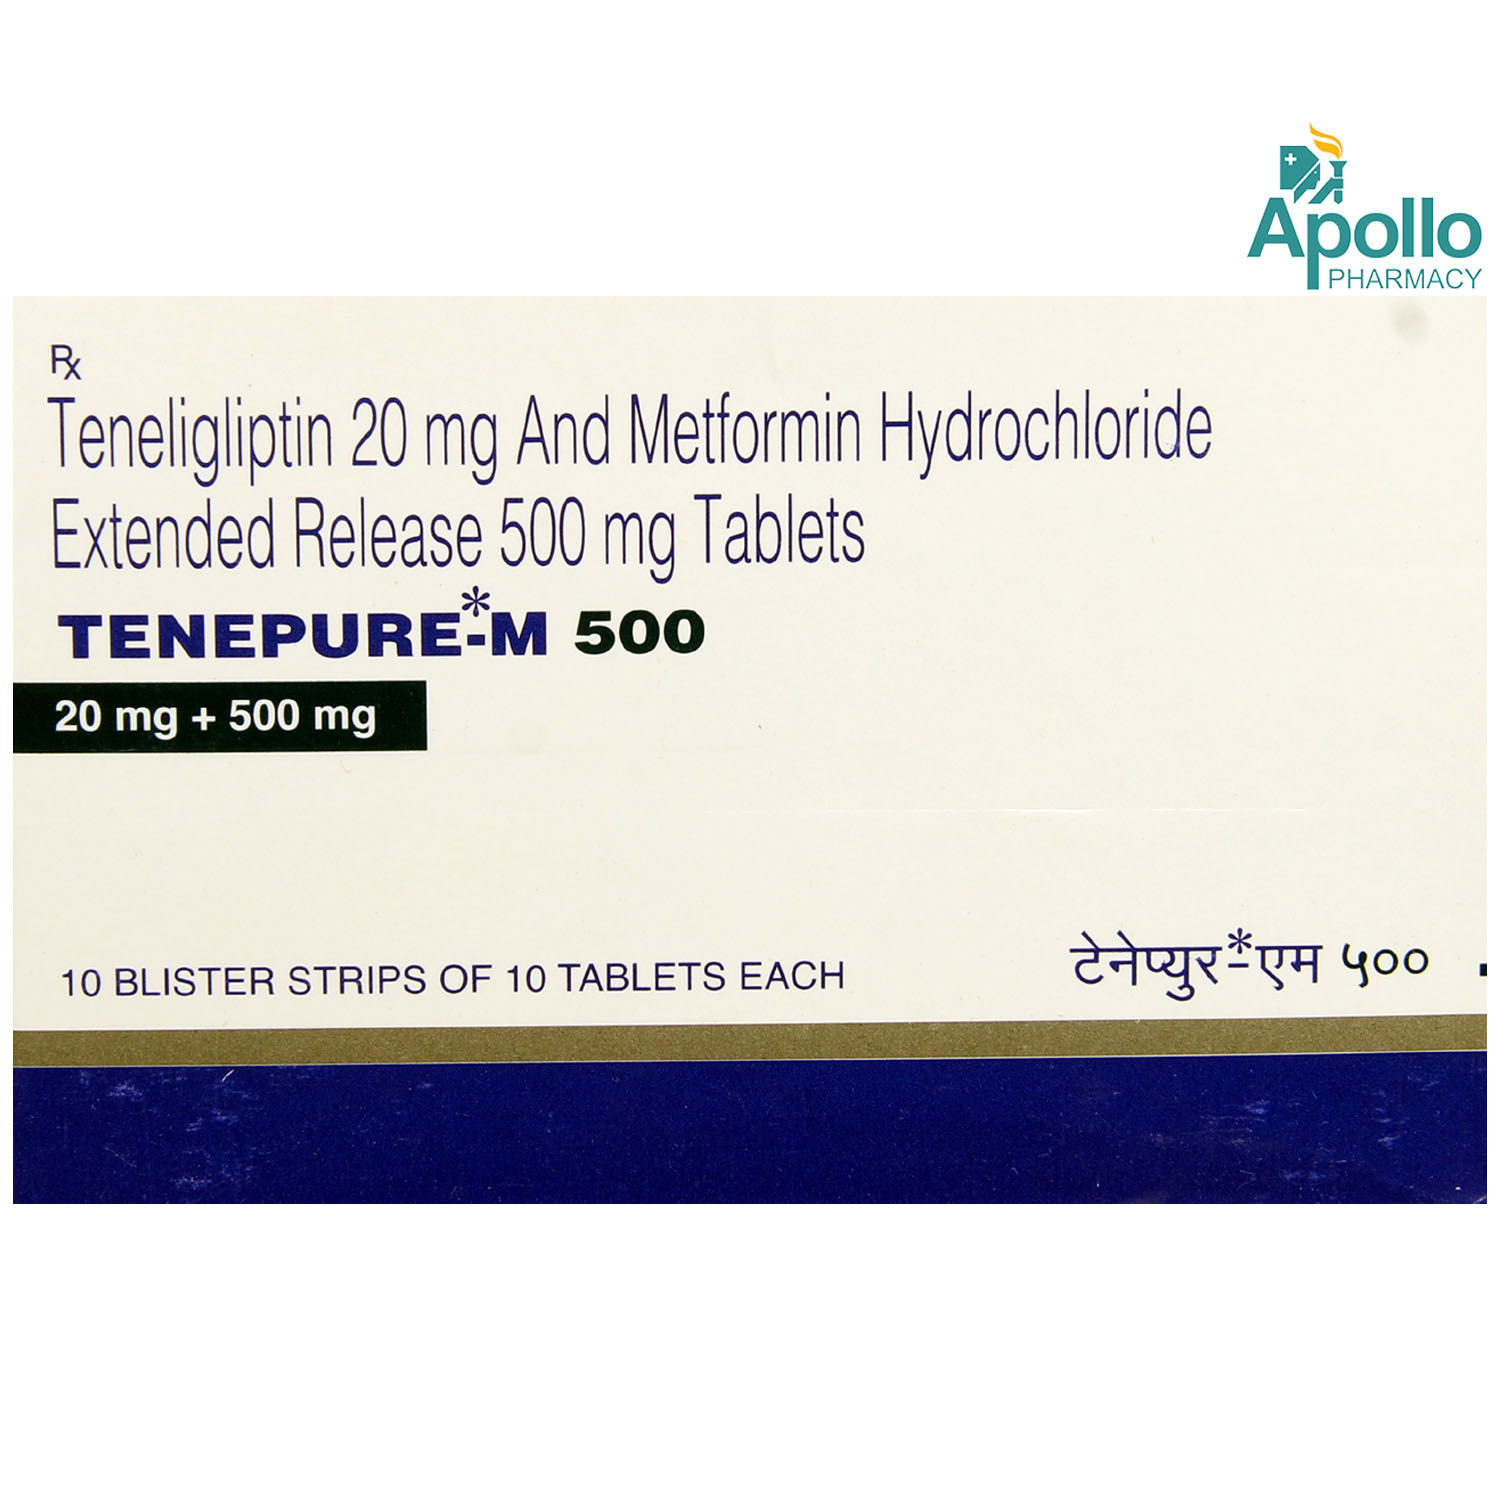 Tenepure M 500 Tablet 10 S Price Uses Side Effects Composition Apollo Pharmacy